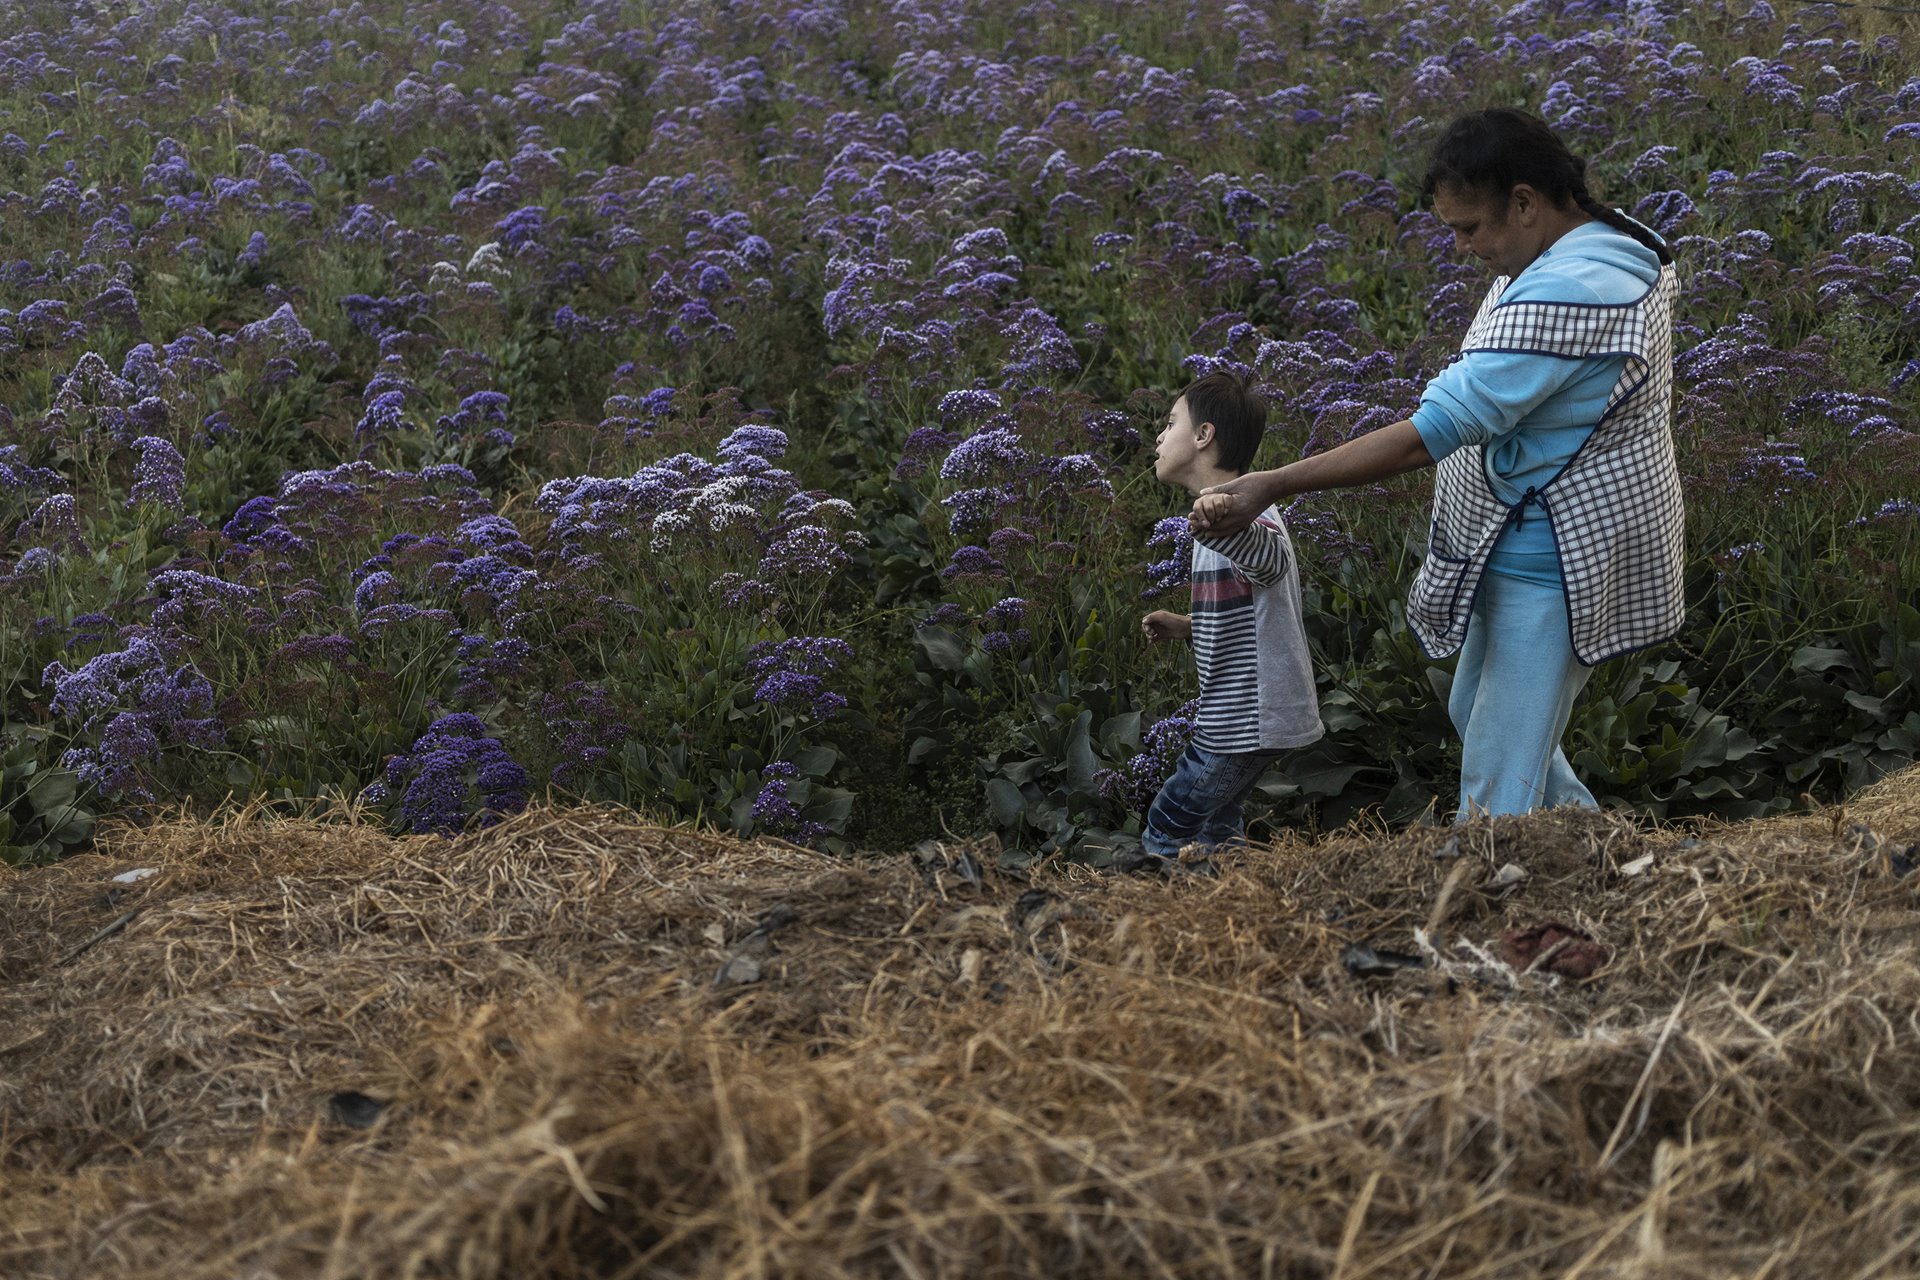 Celerina and her son Gael, who lives with Down syndrome, walk through a flower field in Villa Guerrero, Mexico.